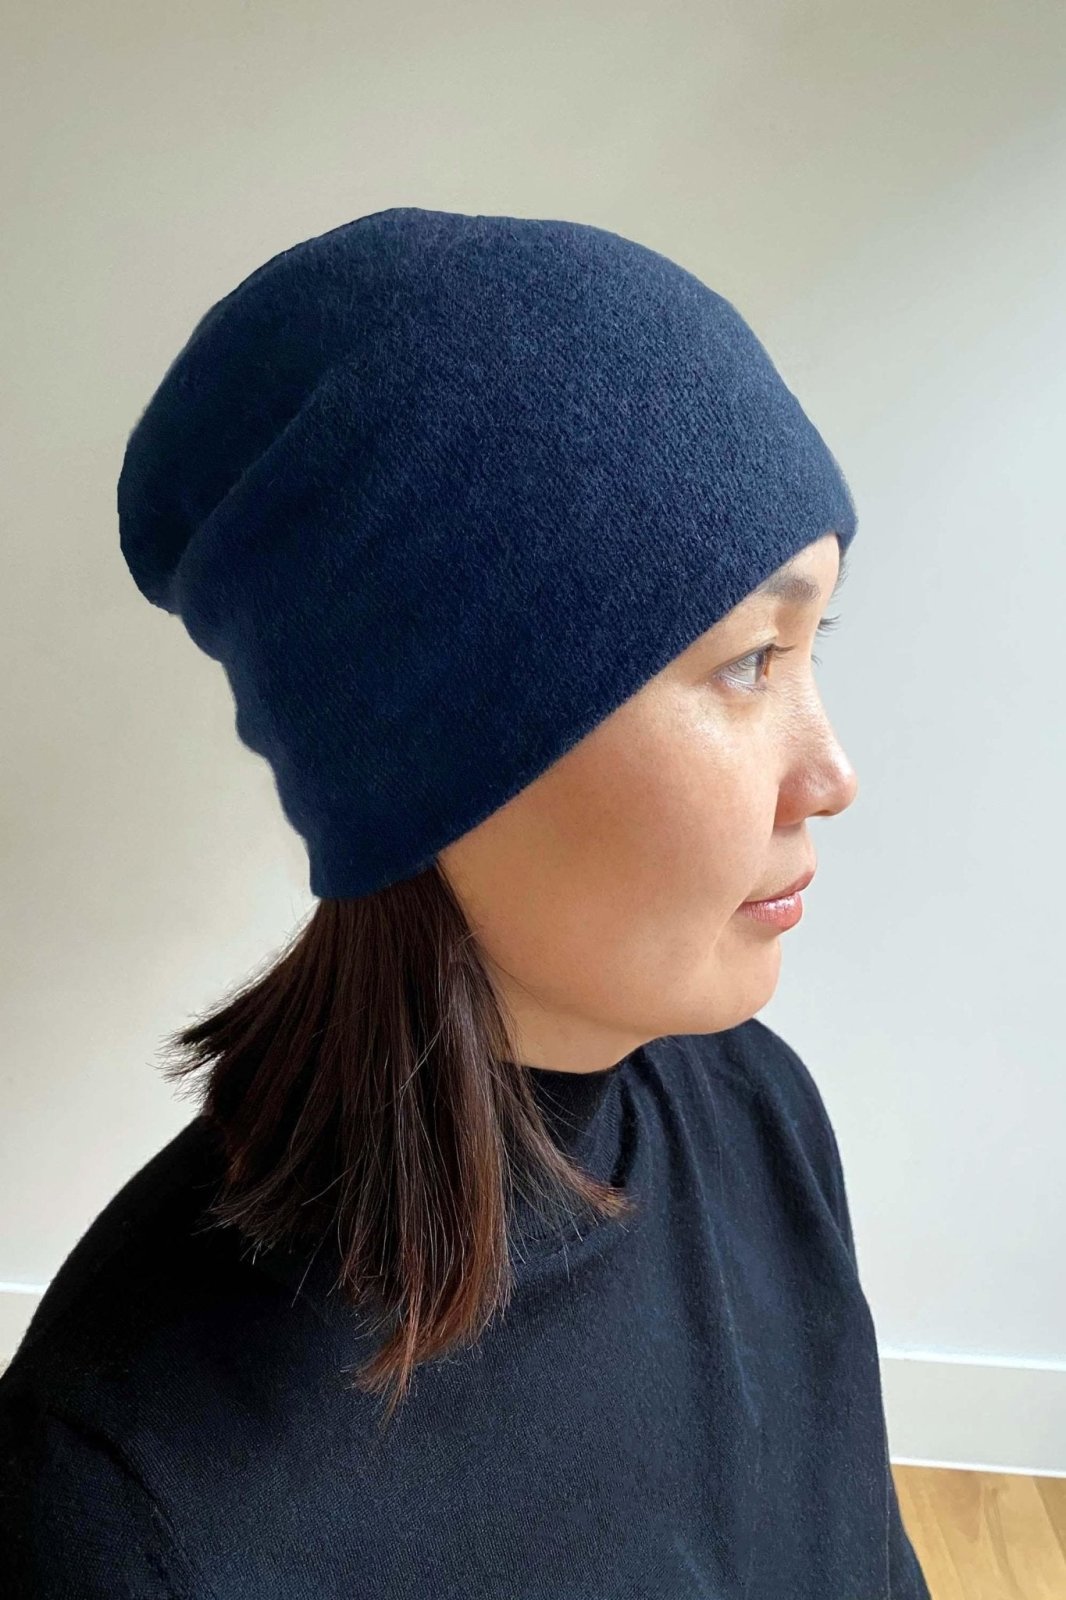 Bundle offer for women's cashmere hat, scarf and gloves in Dark navy blue - SEMON Cashmere